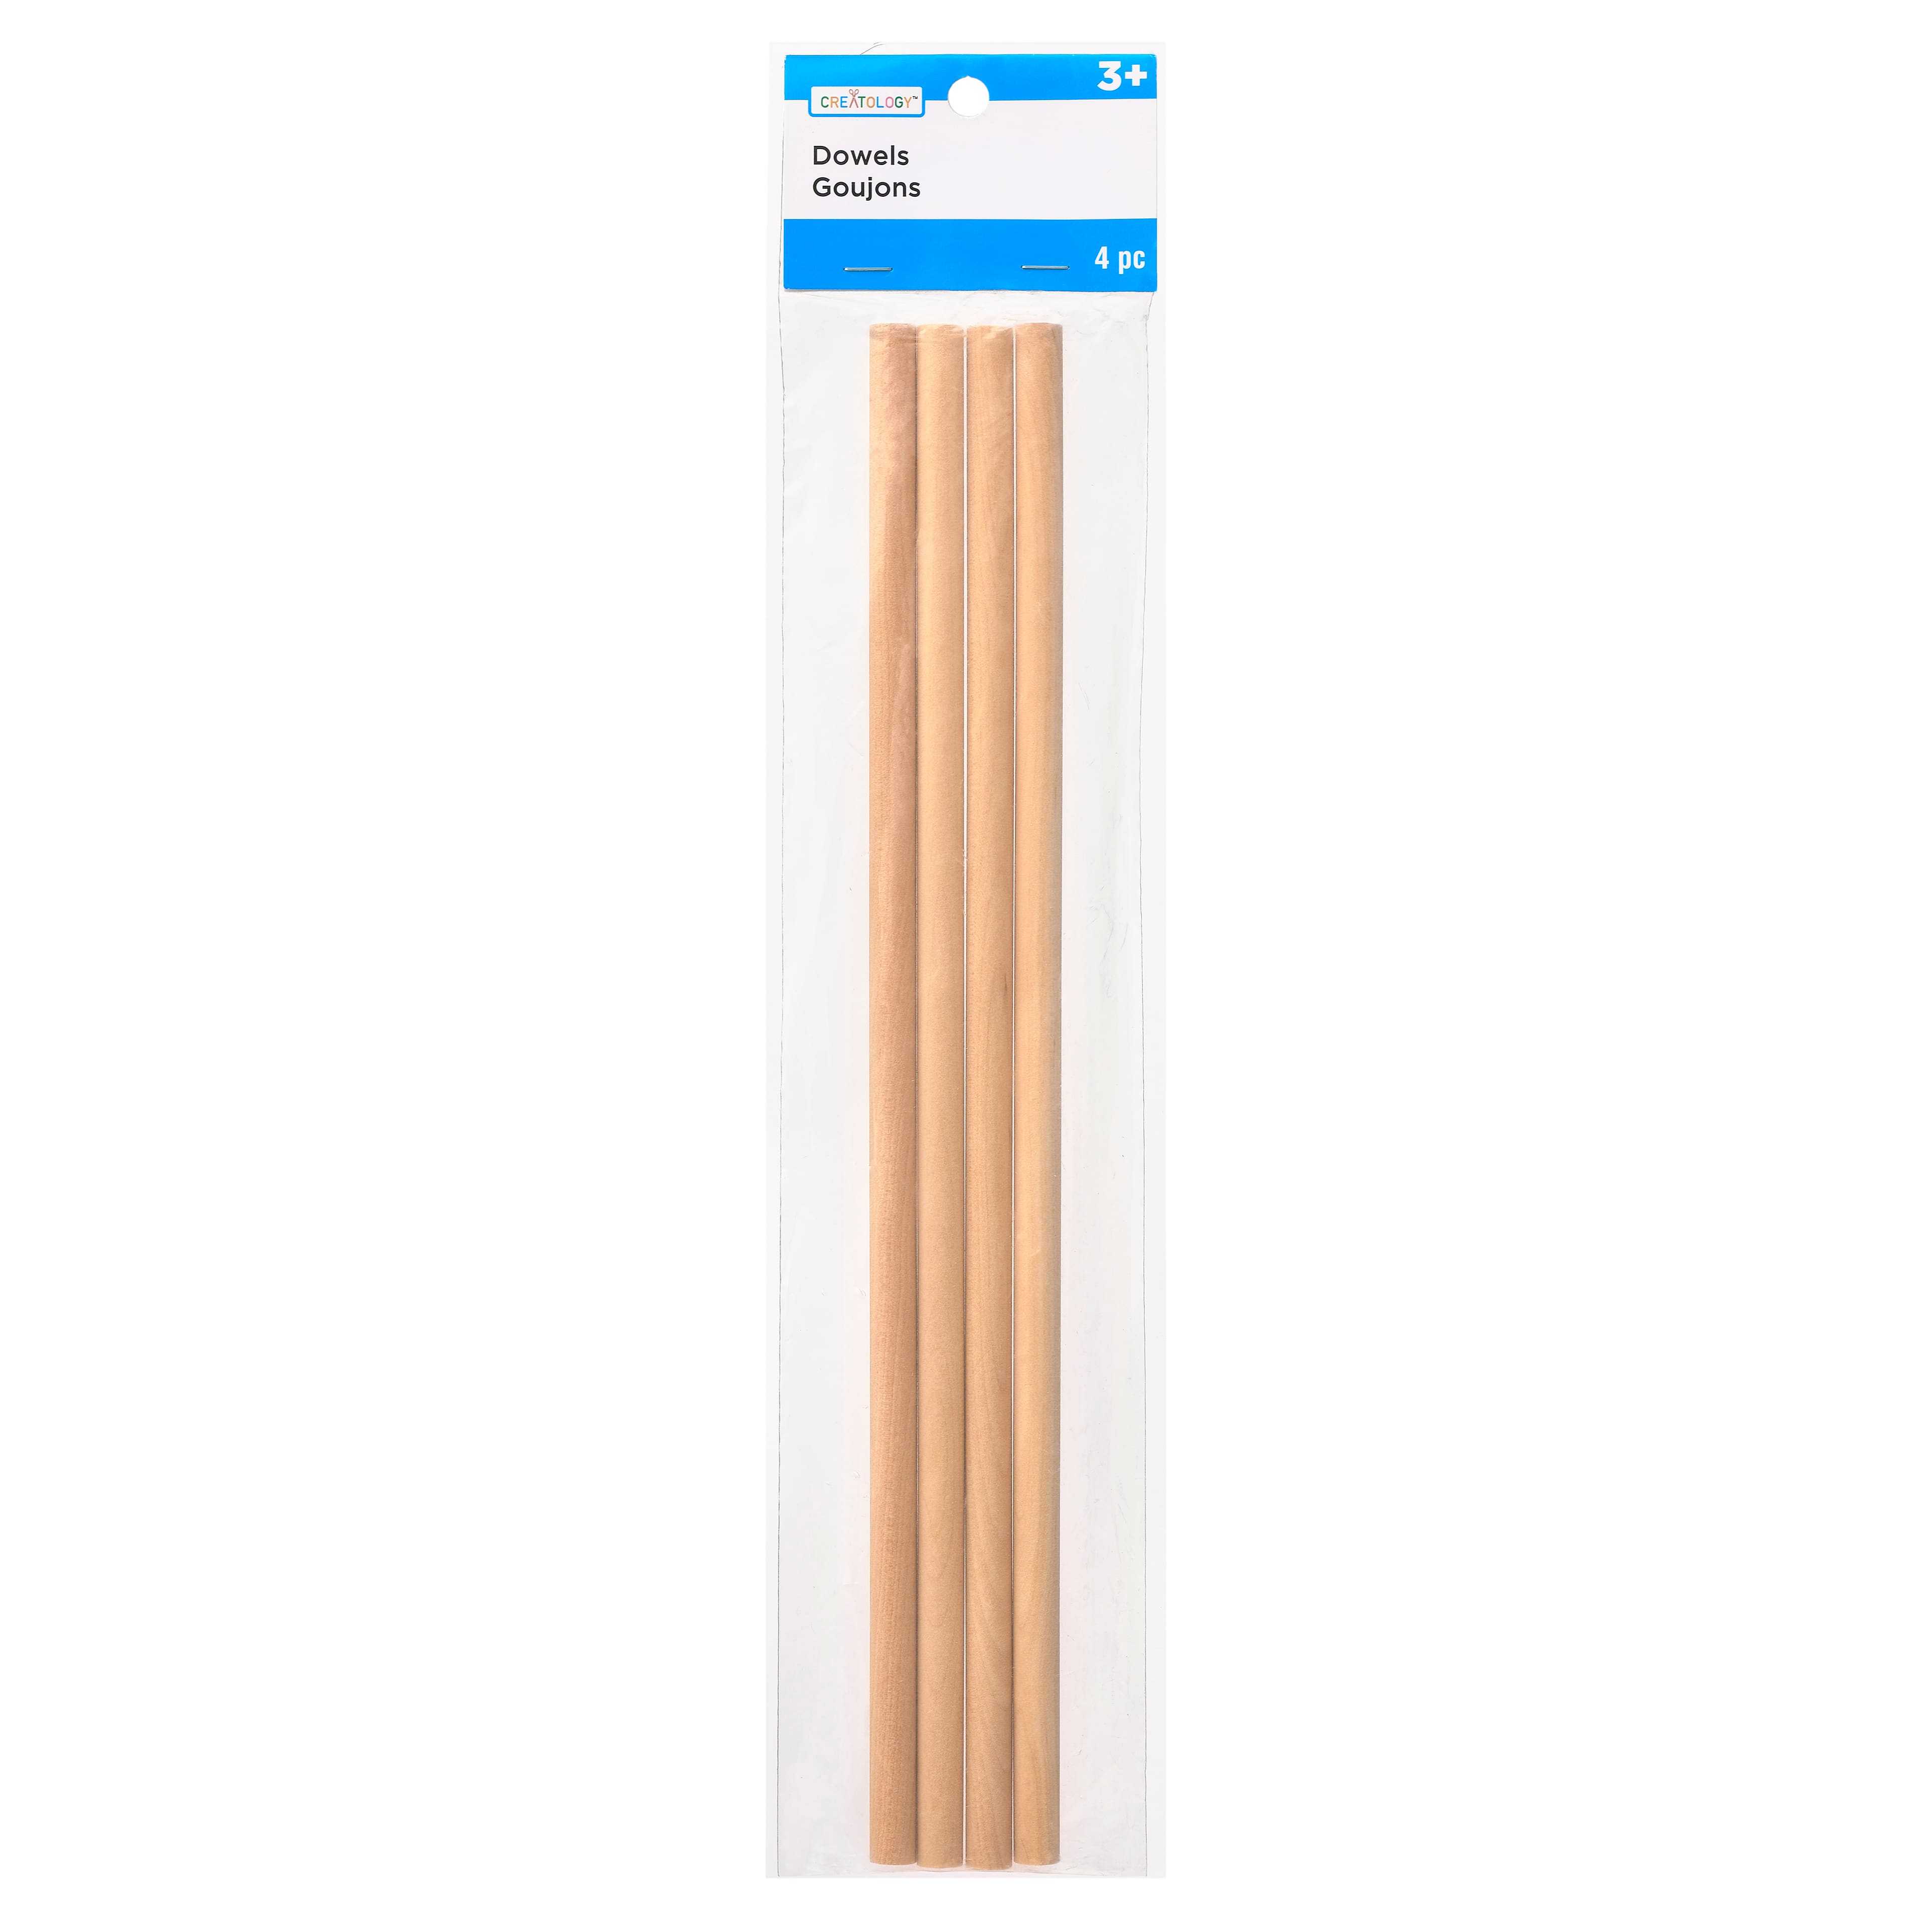 12 Packs: 4 ct. (48 total) 3/8 x 12 Wooden Dowels by Creatology